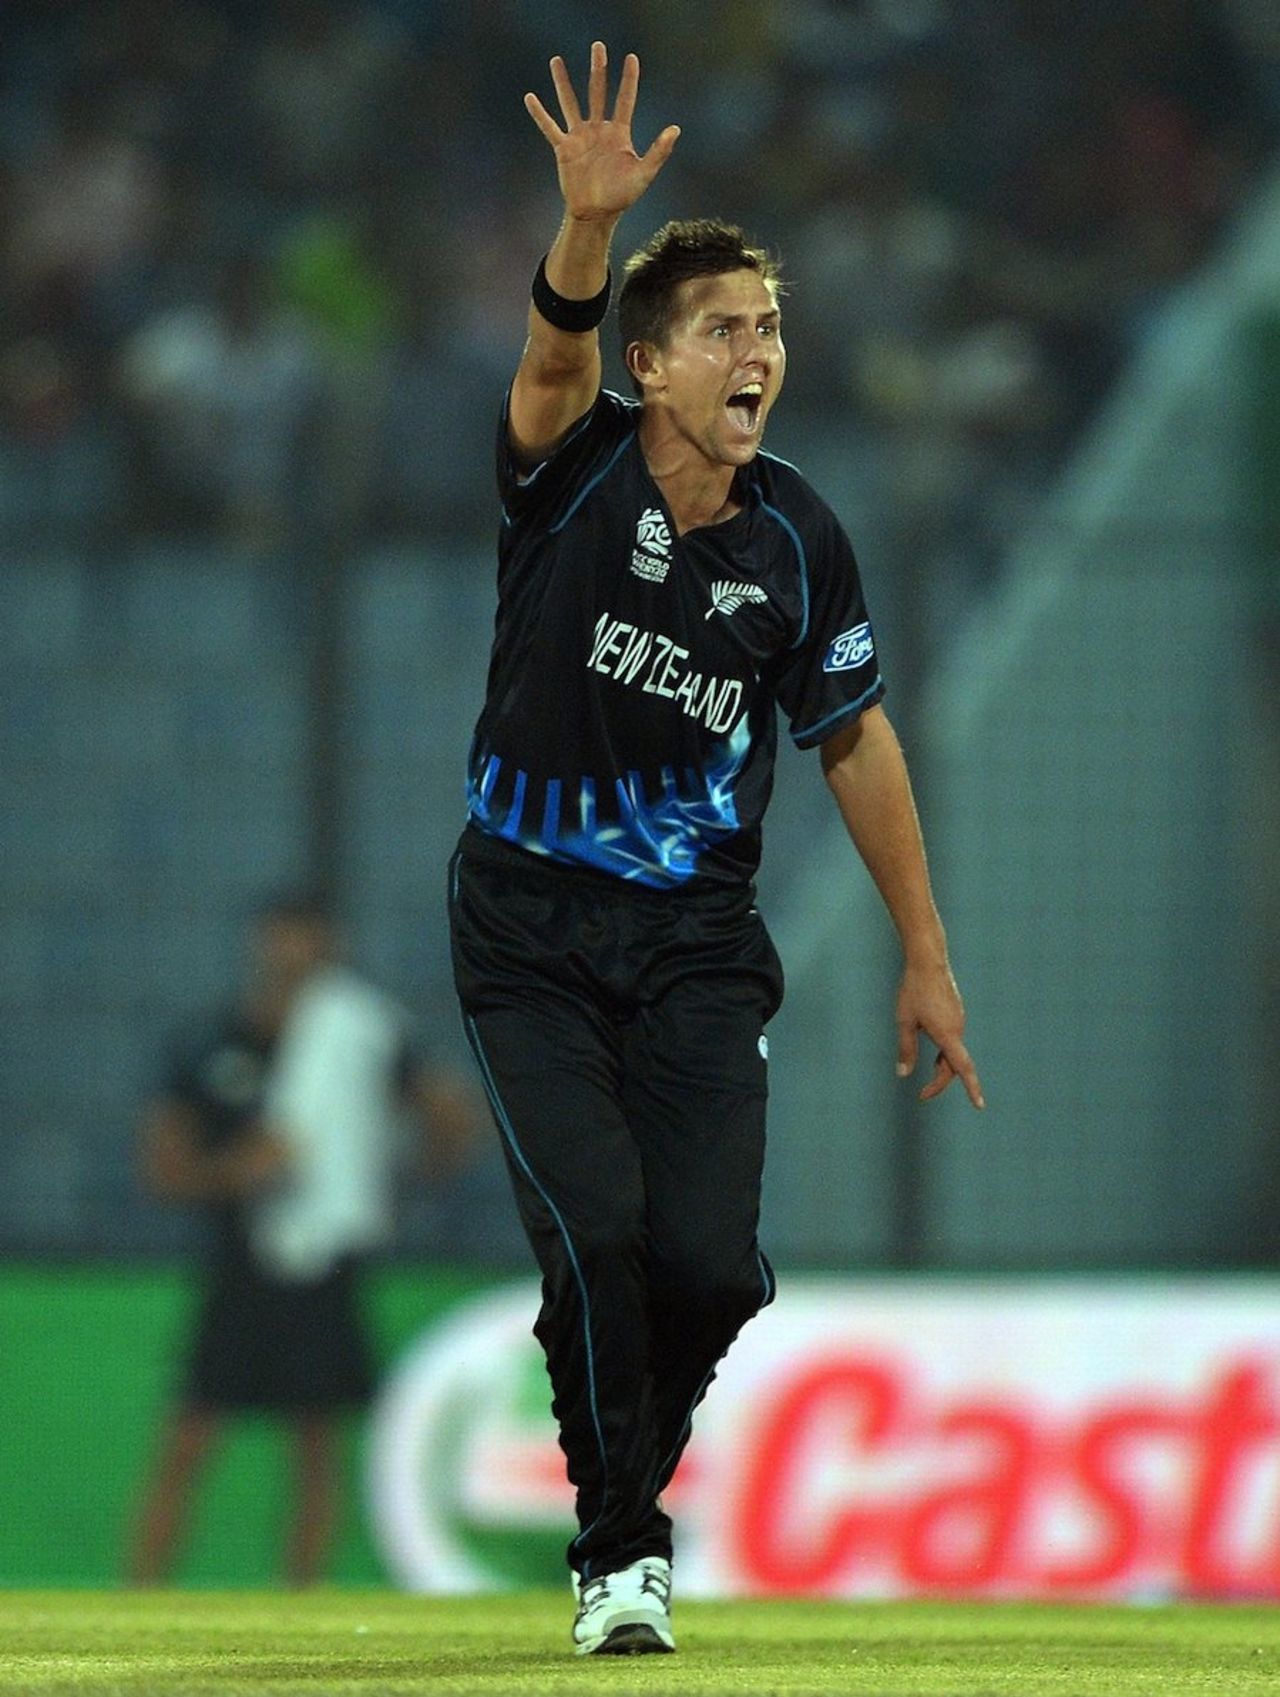 Trent Boult appeals for a wicket, New Zealand v Sri Lanka, World T20, Group 1, Chittagong, March 31, 2014